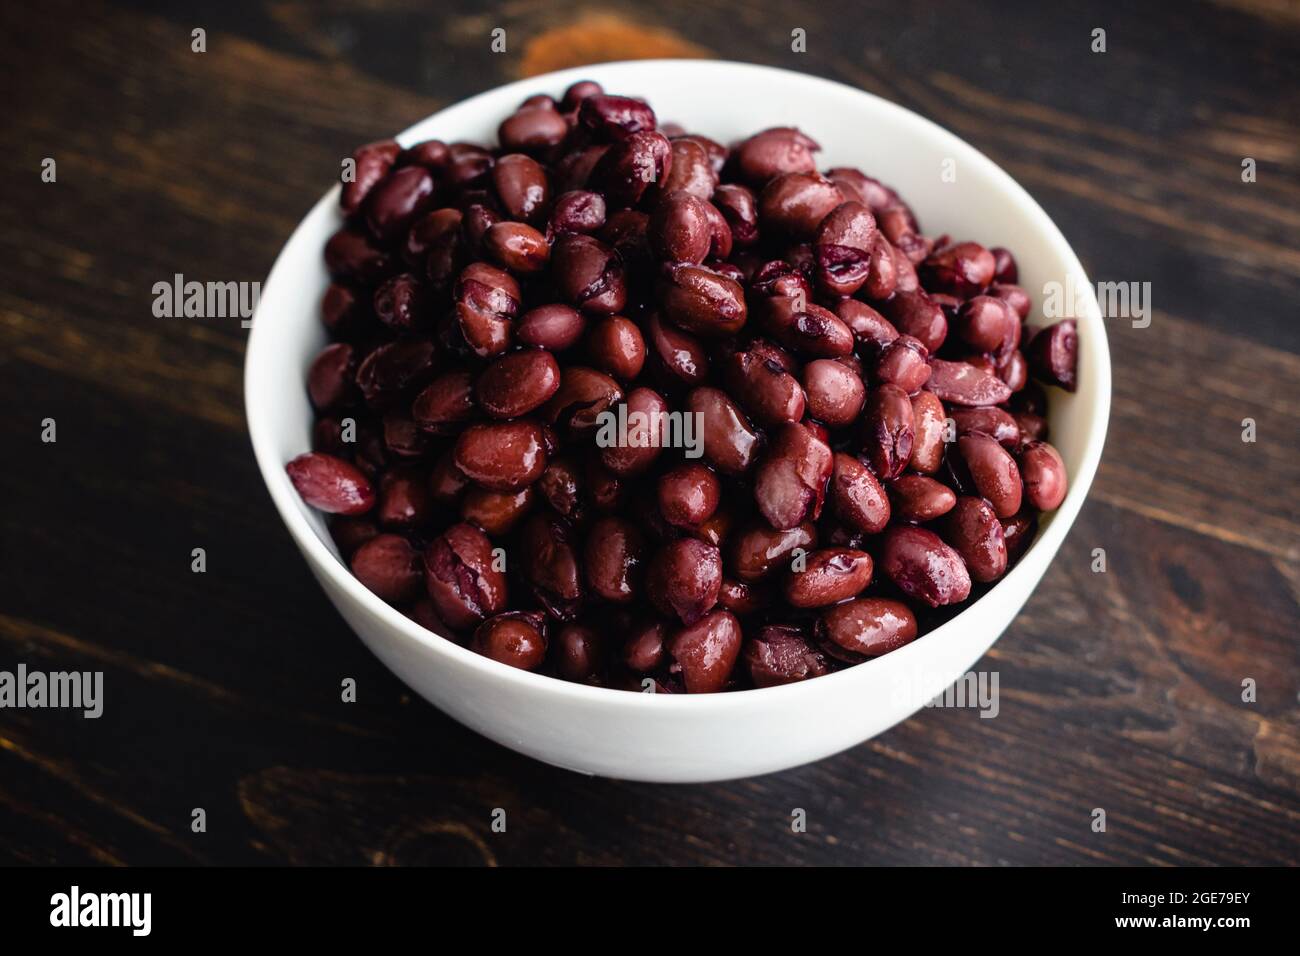 Small Bowl of Drained and Rinsed Canned Black Beans: Unseasoned cooked black beans in a small white ceramic bowl Stock Photo